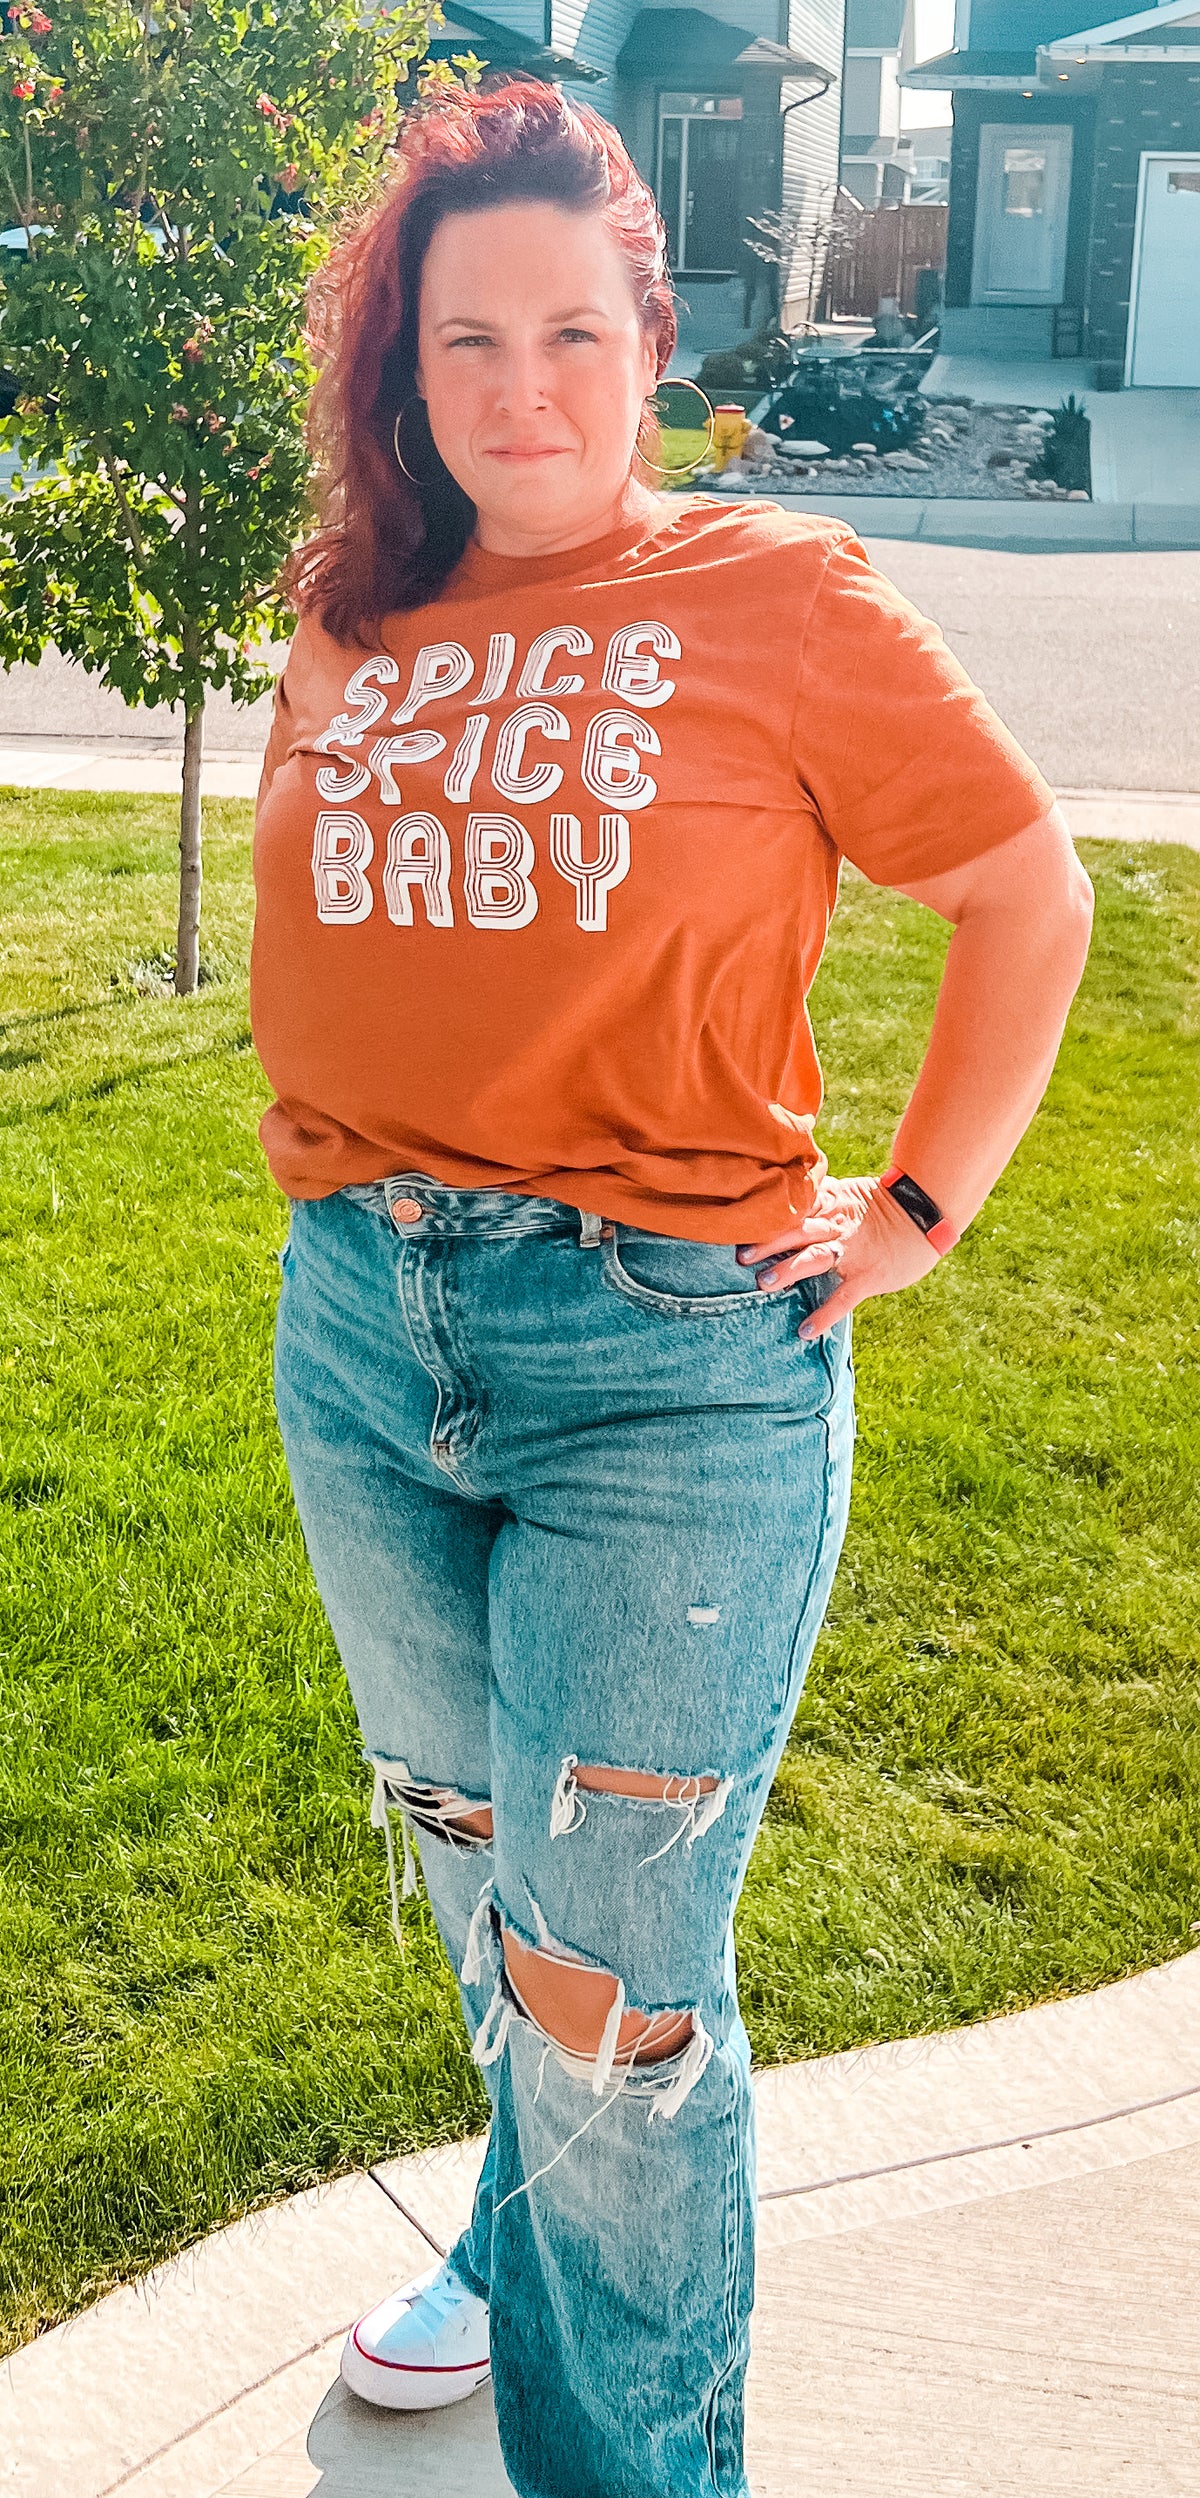 Spice Spice Baby T-shirt